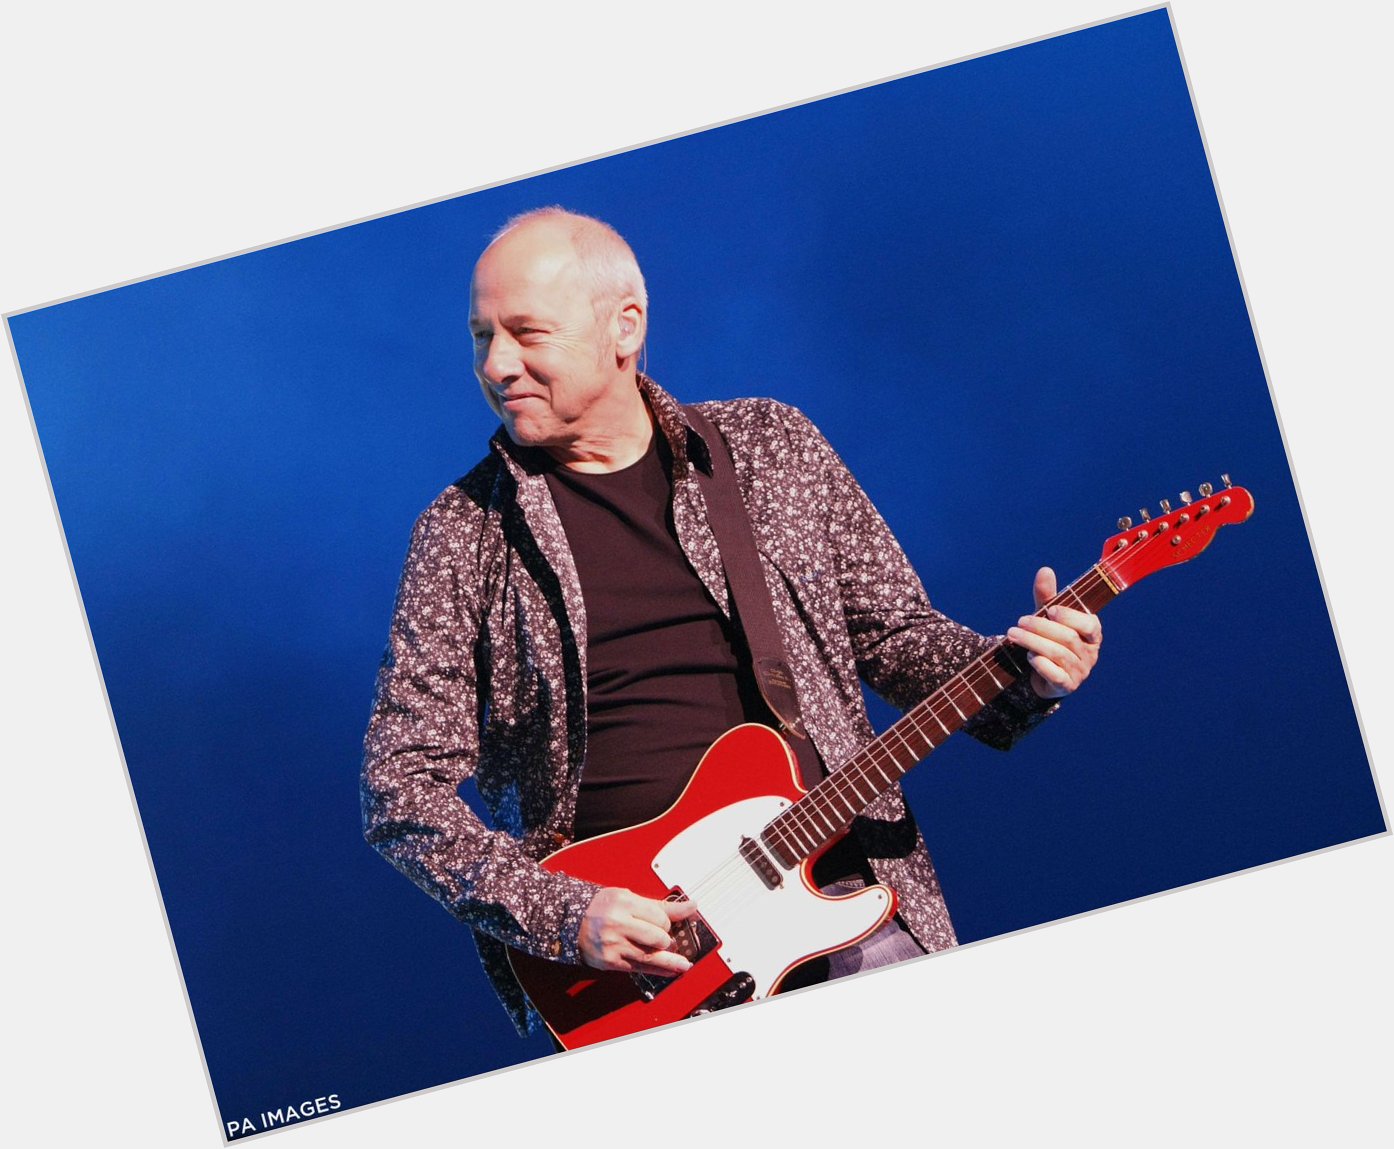 A very happy 66th birthday to the Sultan of Swing, Mark Knopfler. May your walk of life be long! 